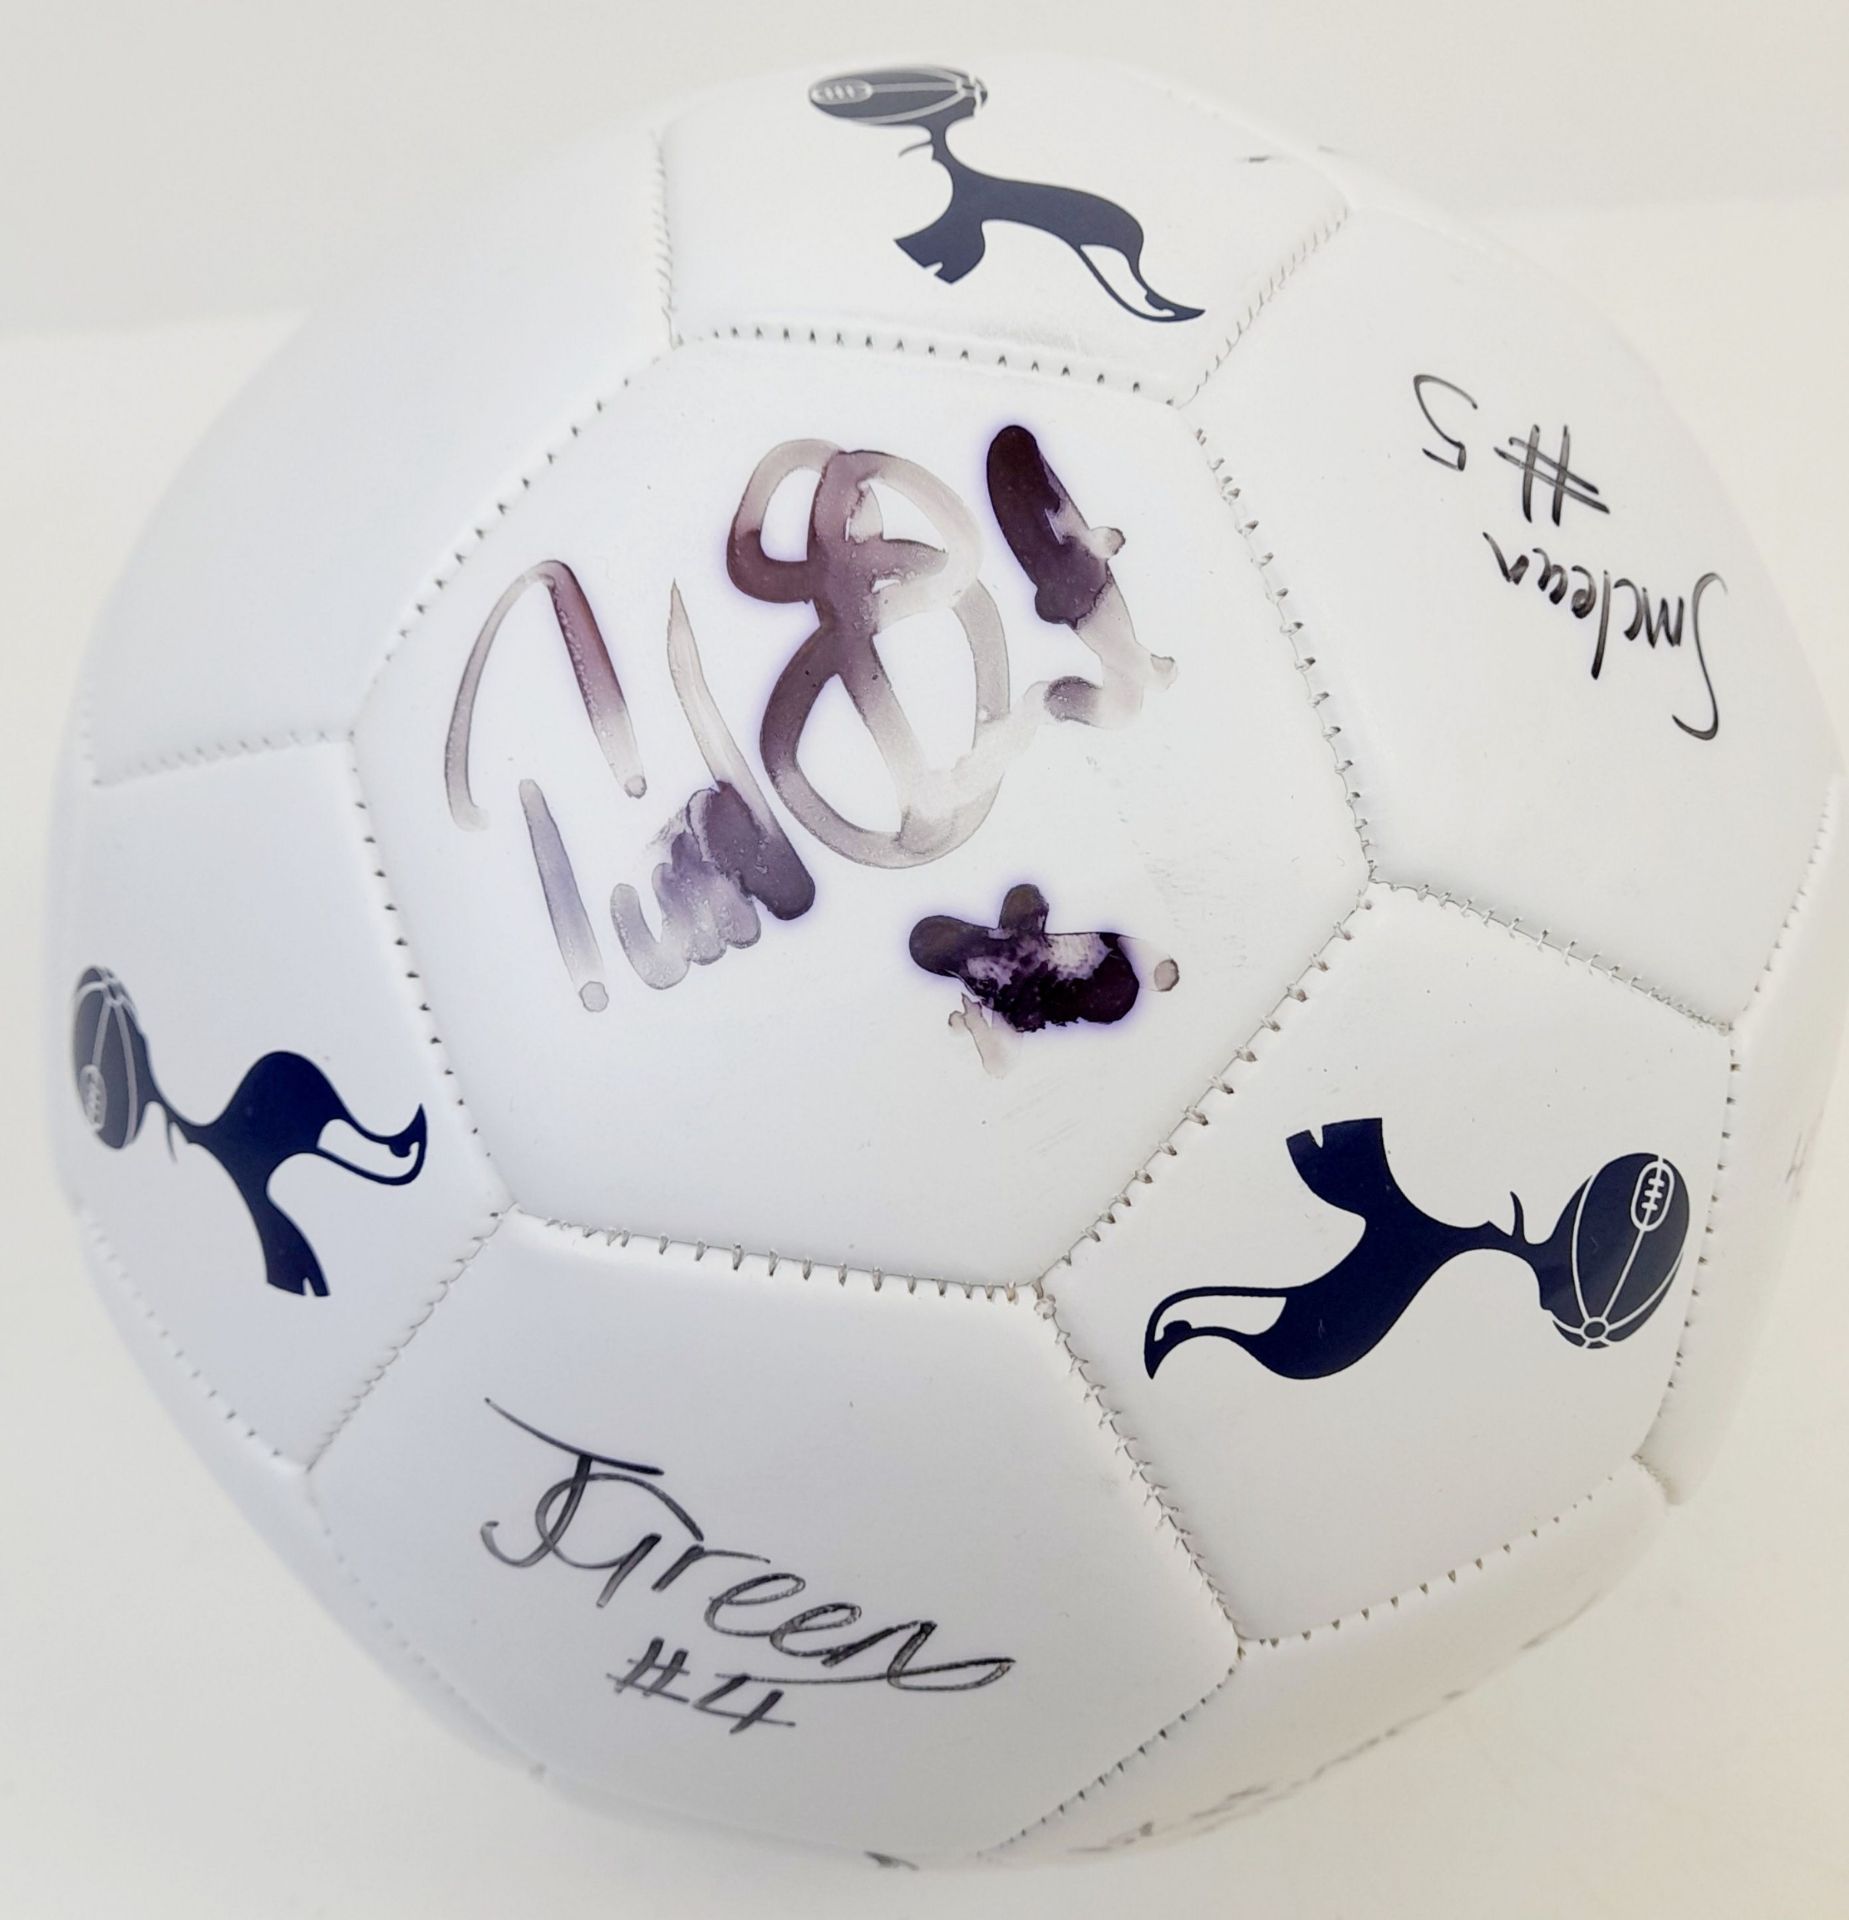 A Tottenham FC Official Signature Signed Football - Spurs Ladies! - Image 4 of 5